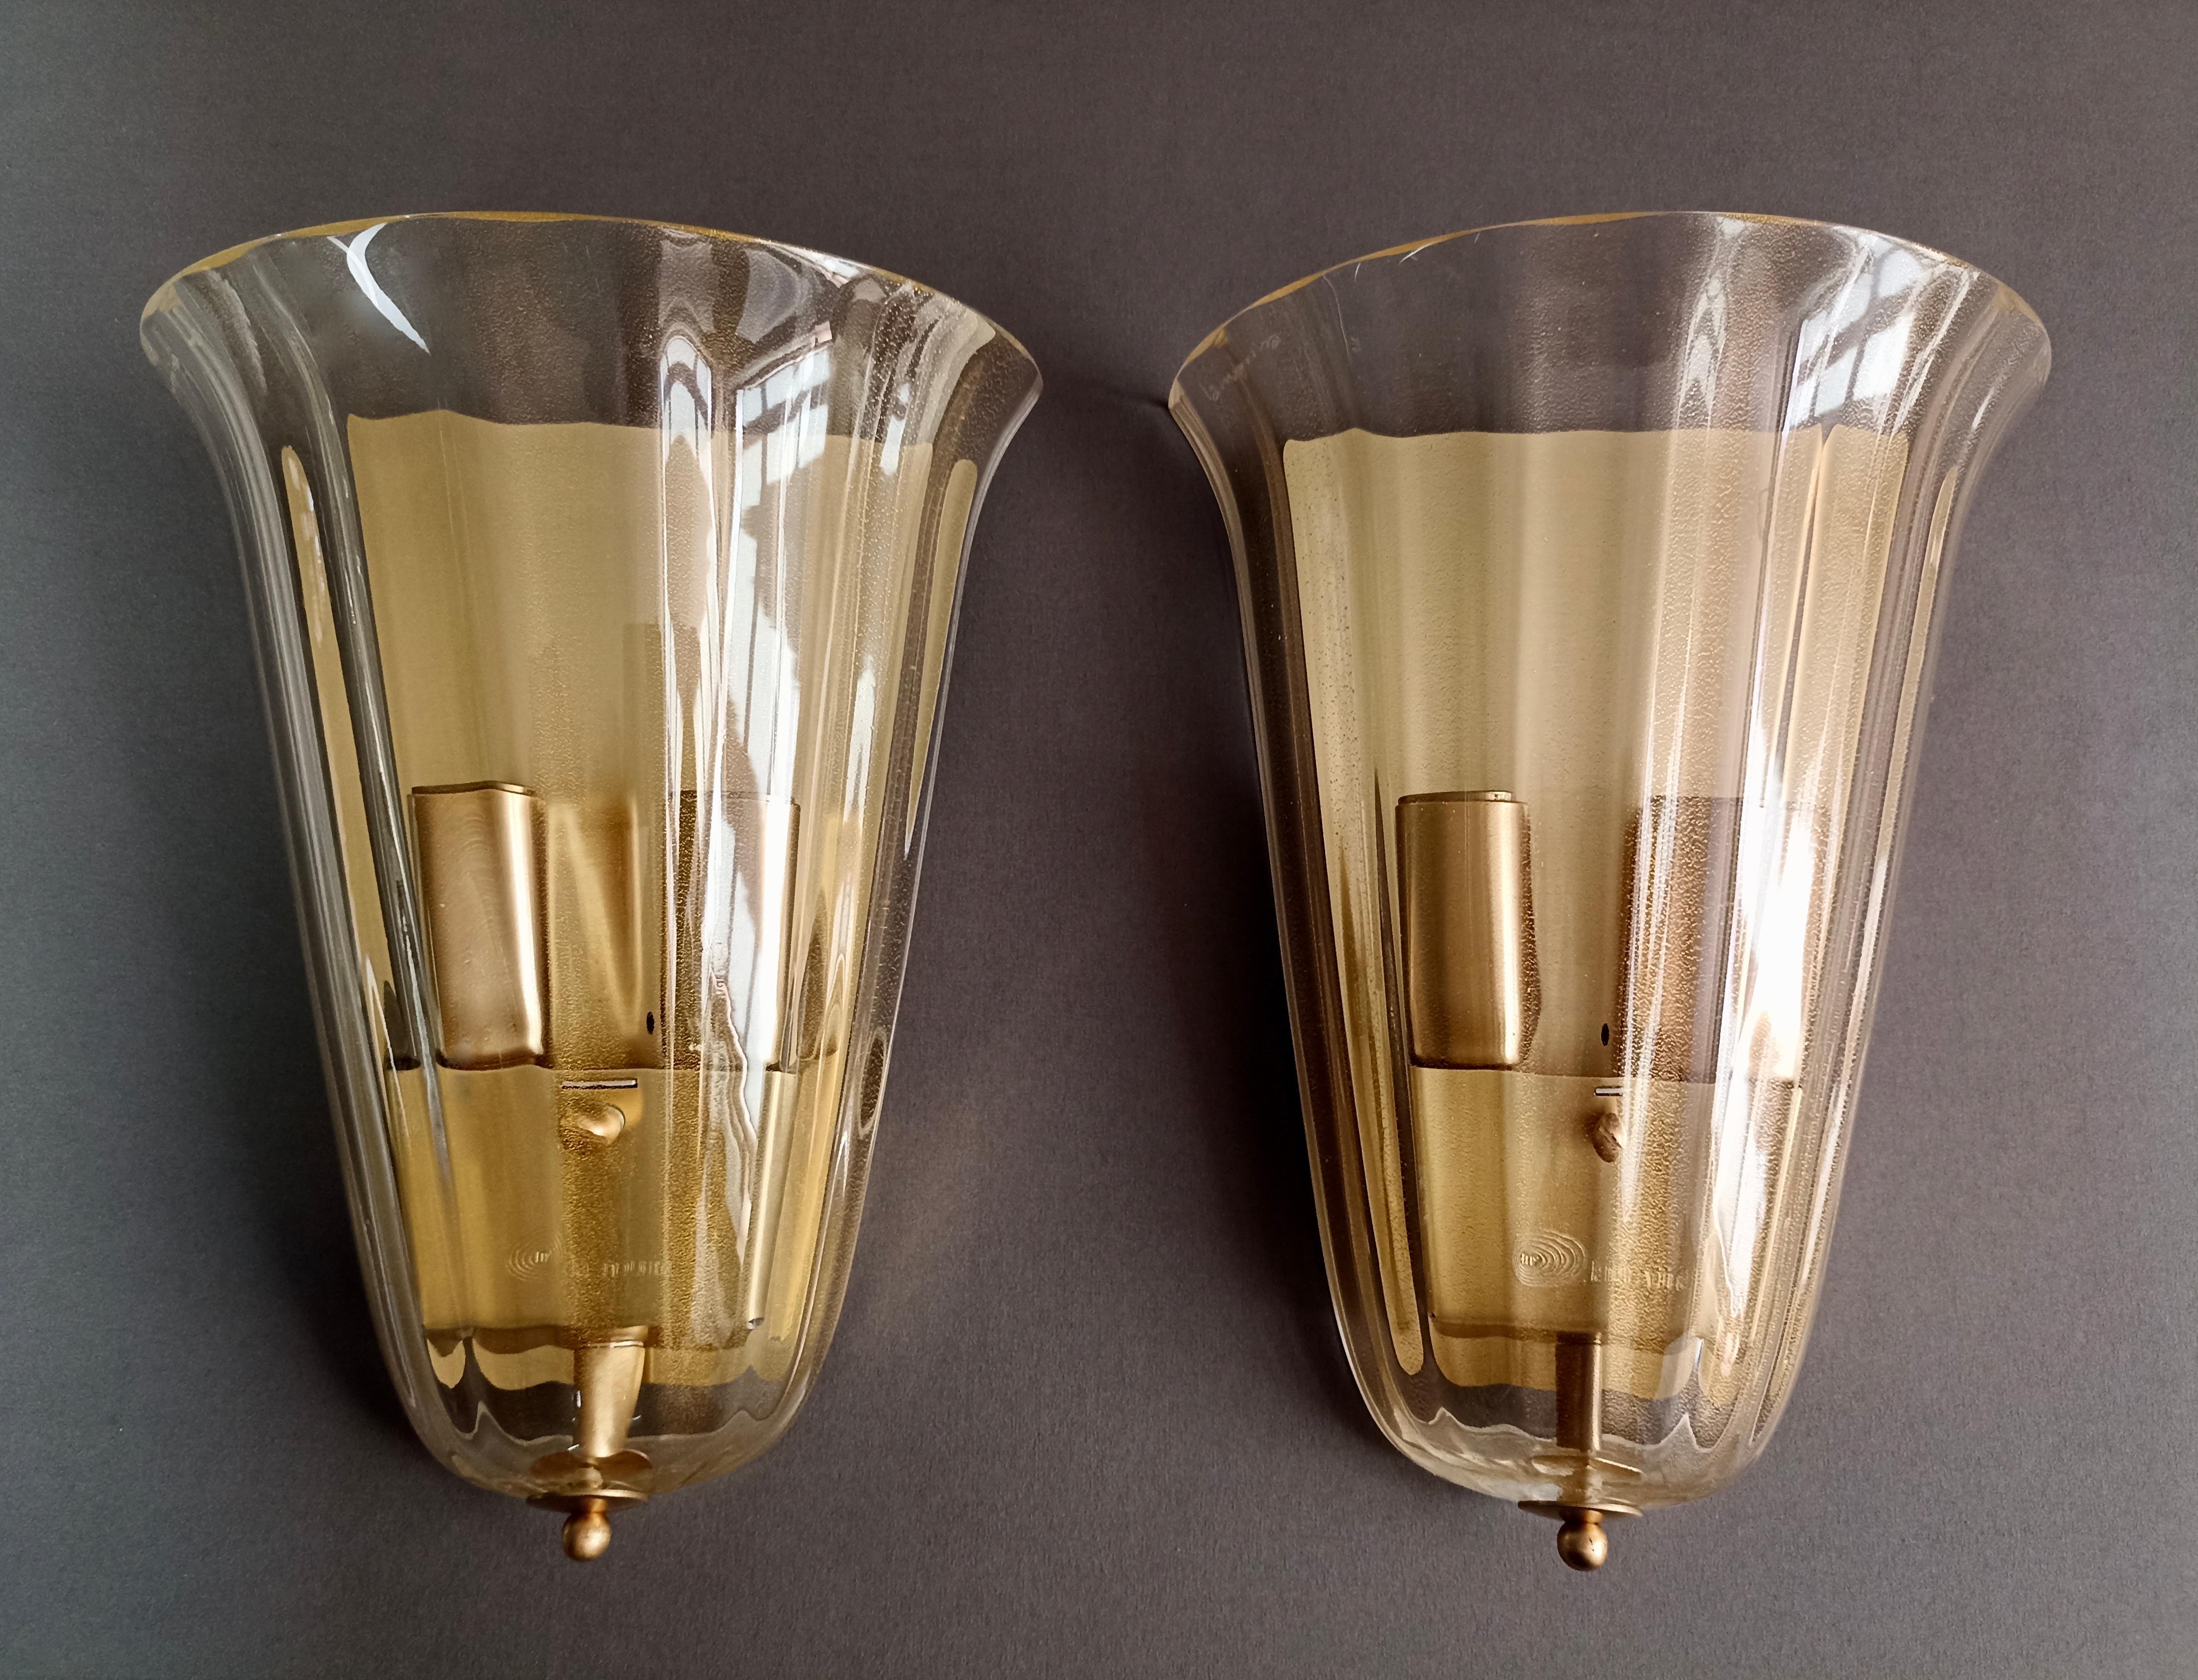 Set of two beautiful 1990s La Murrina two-light sconces in clear Murano glass with gold inclusions and gorgeous ribbed workmanship. Great style.
The bases and lamp covers are in gilded metal.
These are truly refined and timeless objects that fit